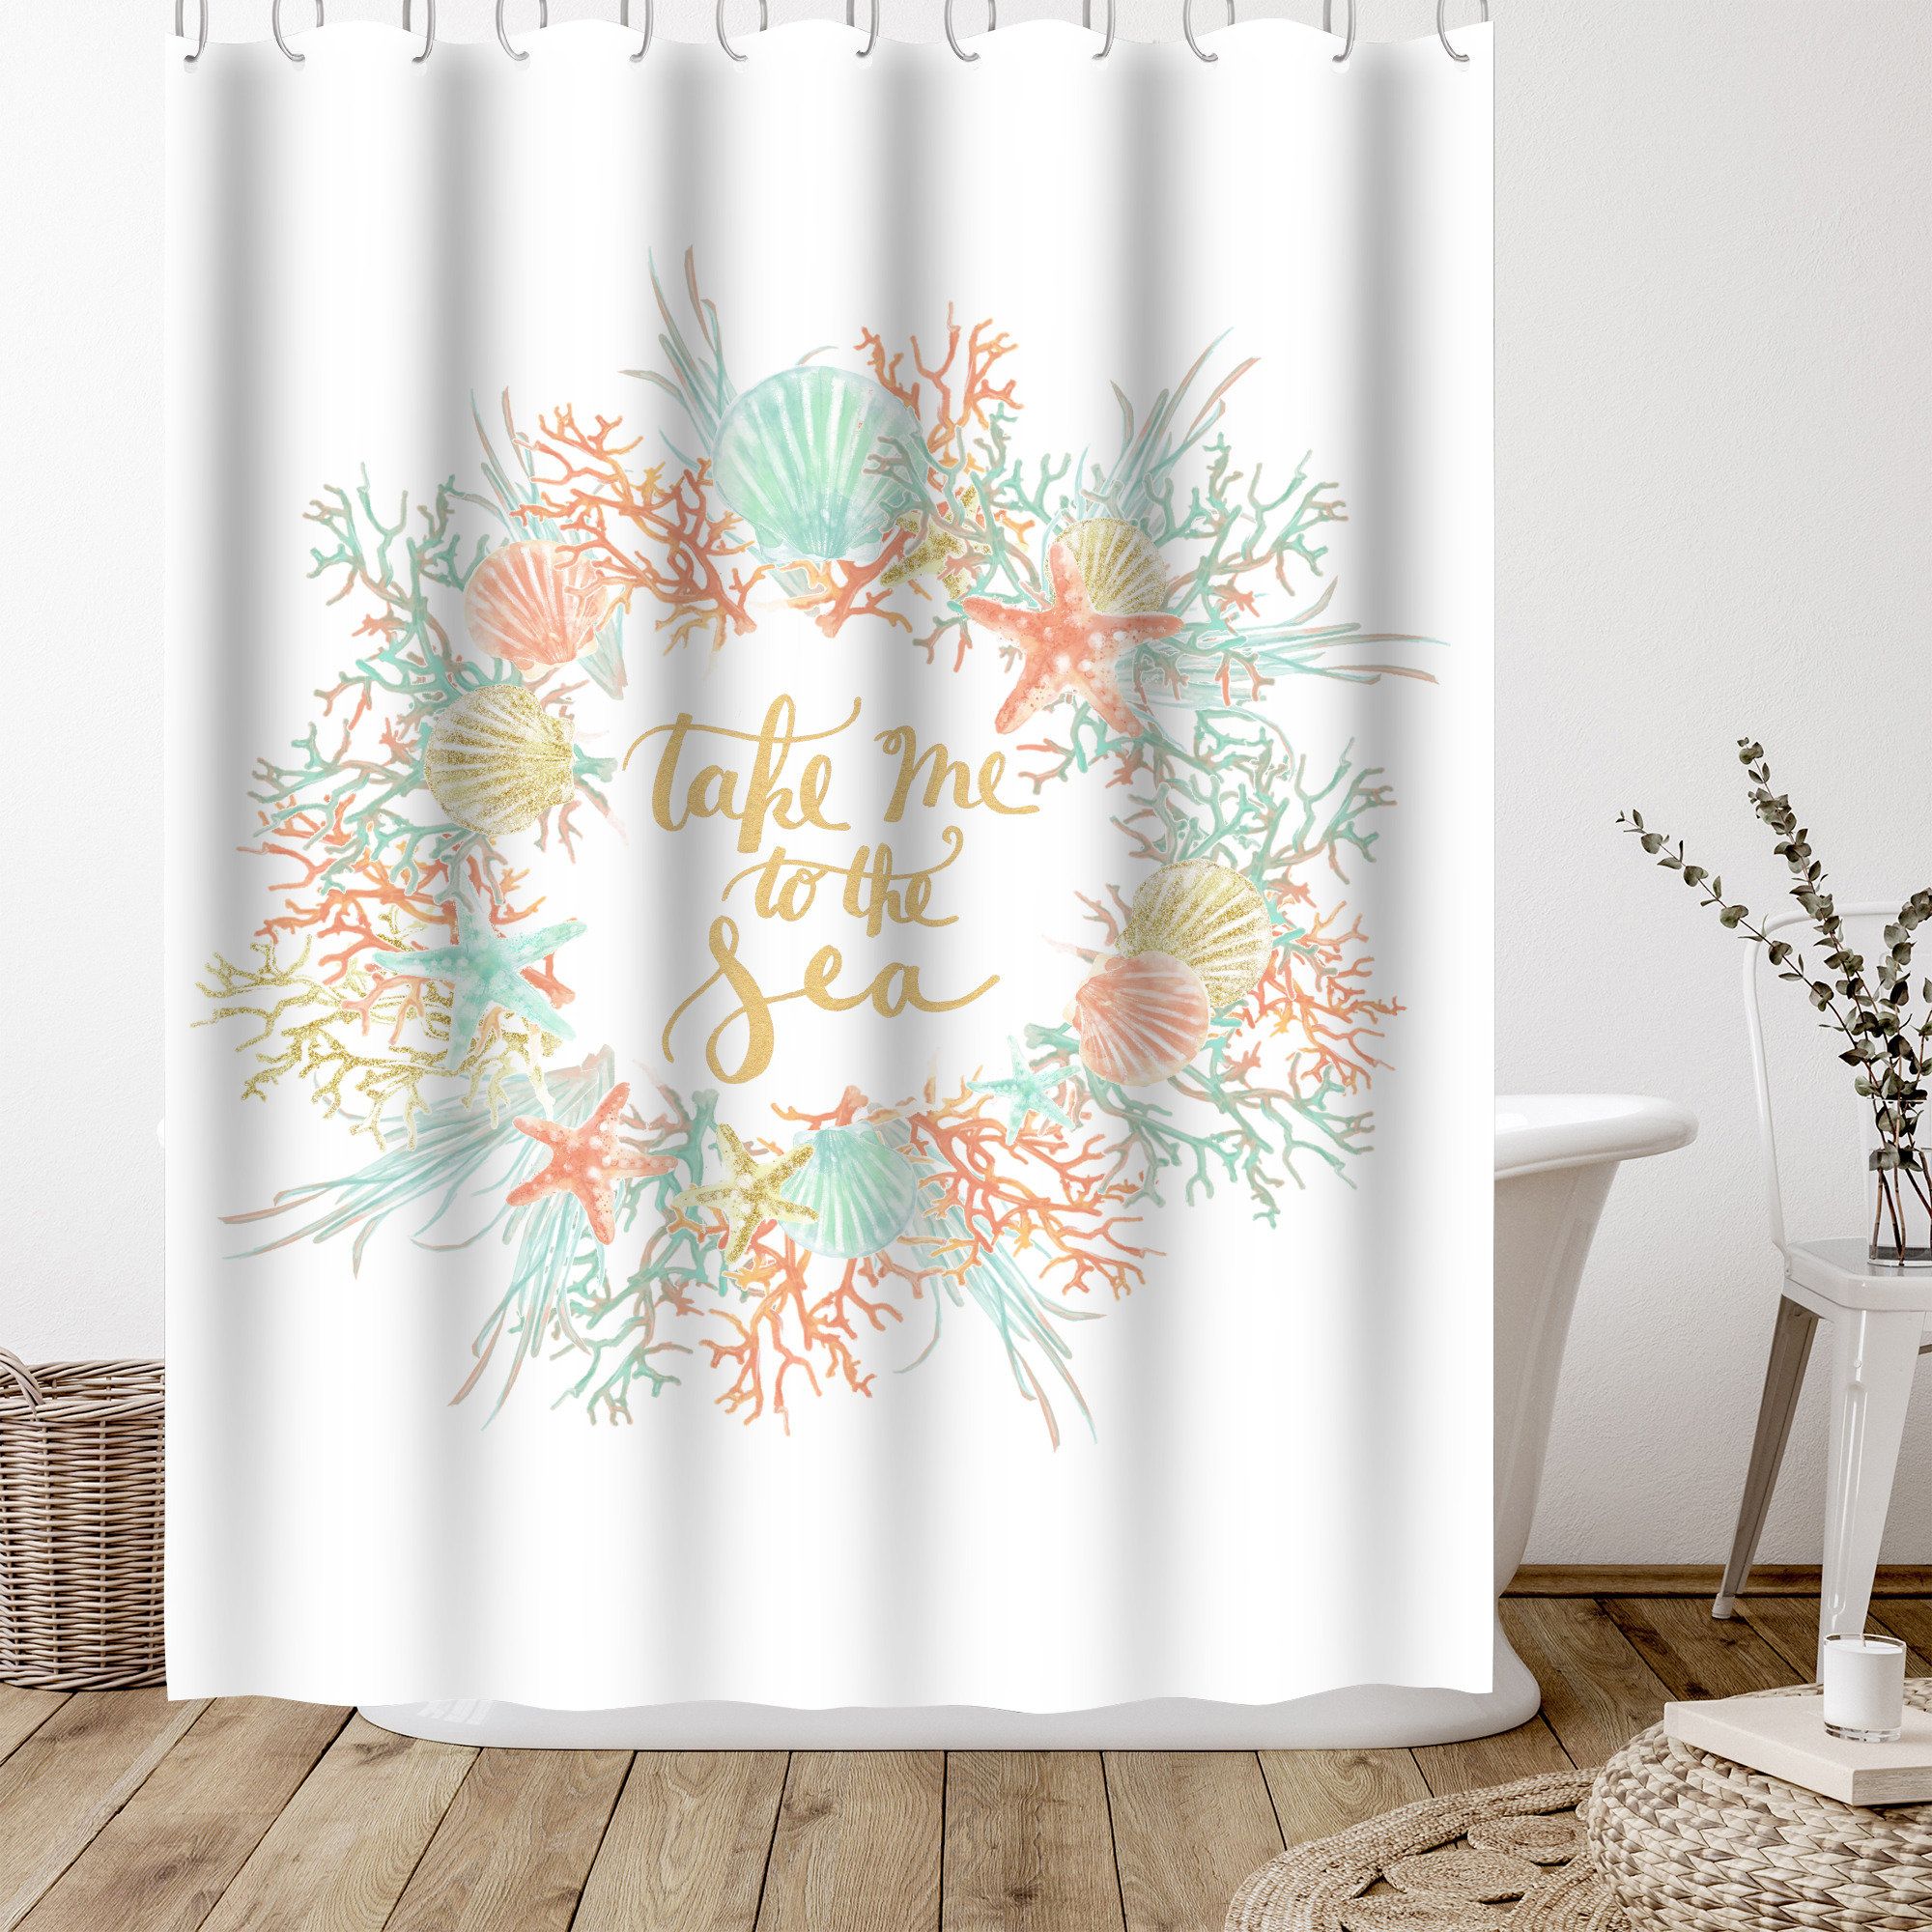 Bless international Quotes Shower Curtain Take Me to the Sea Coastal Print  by Jetty Printables